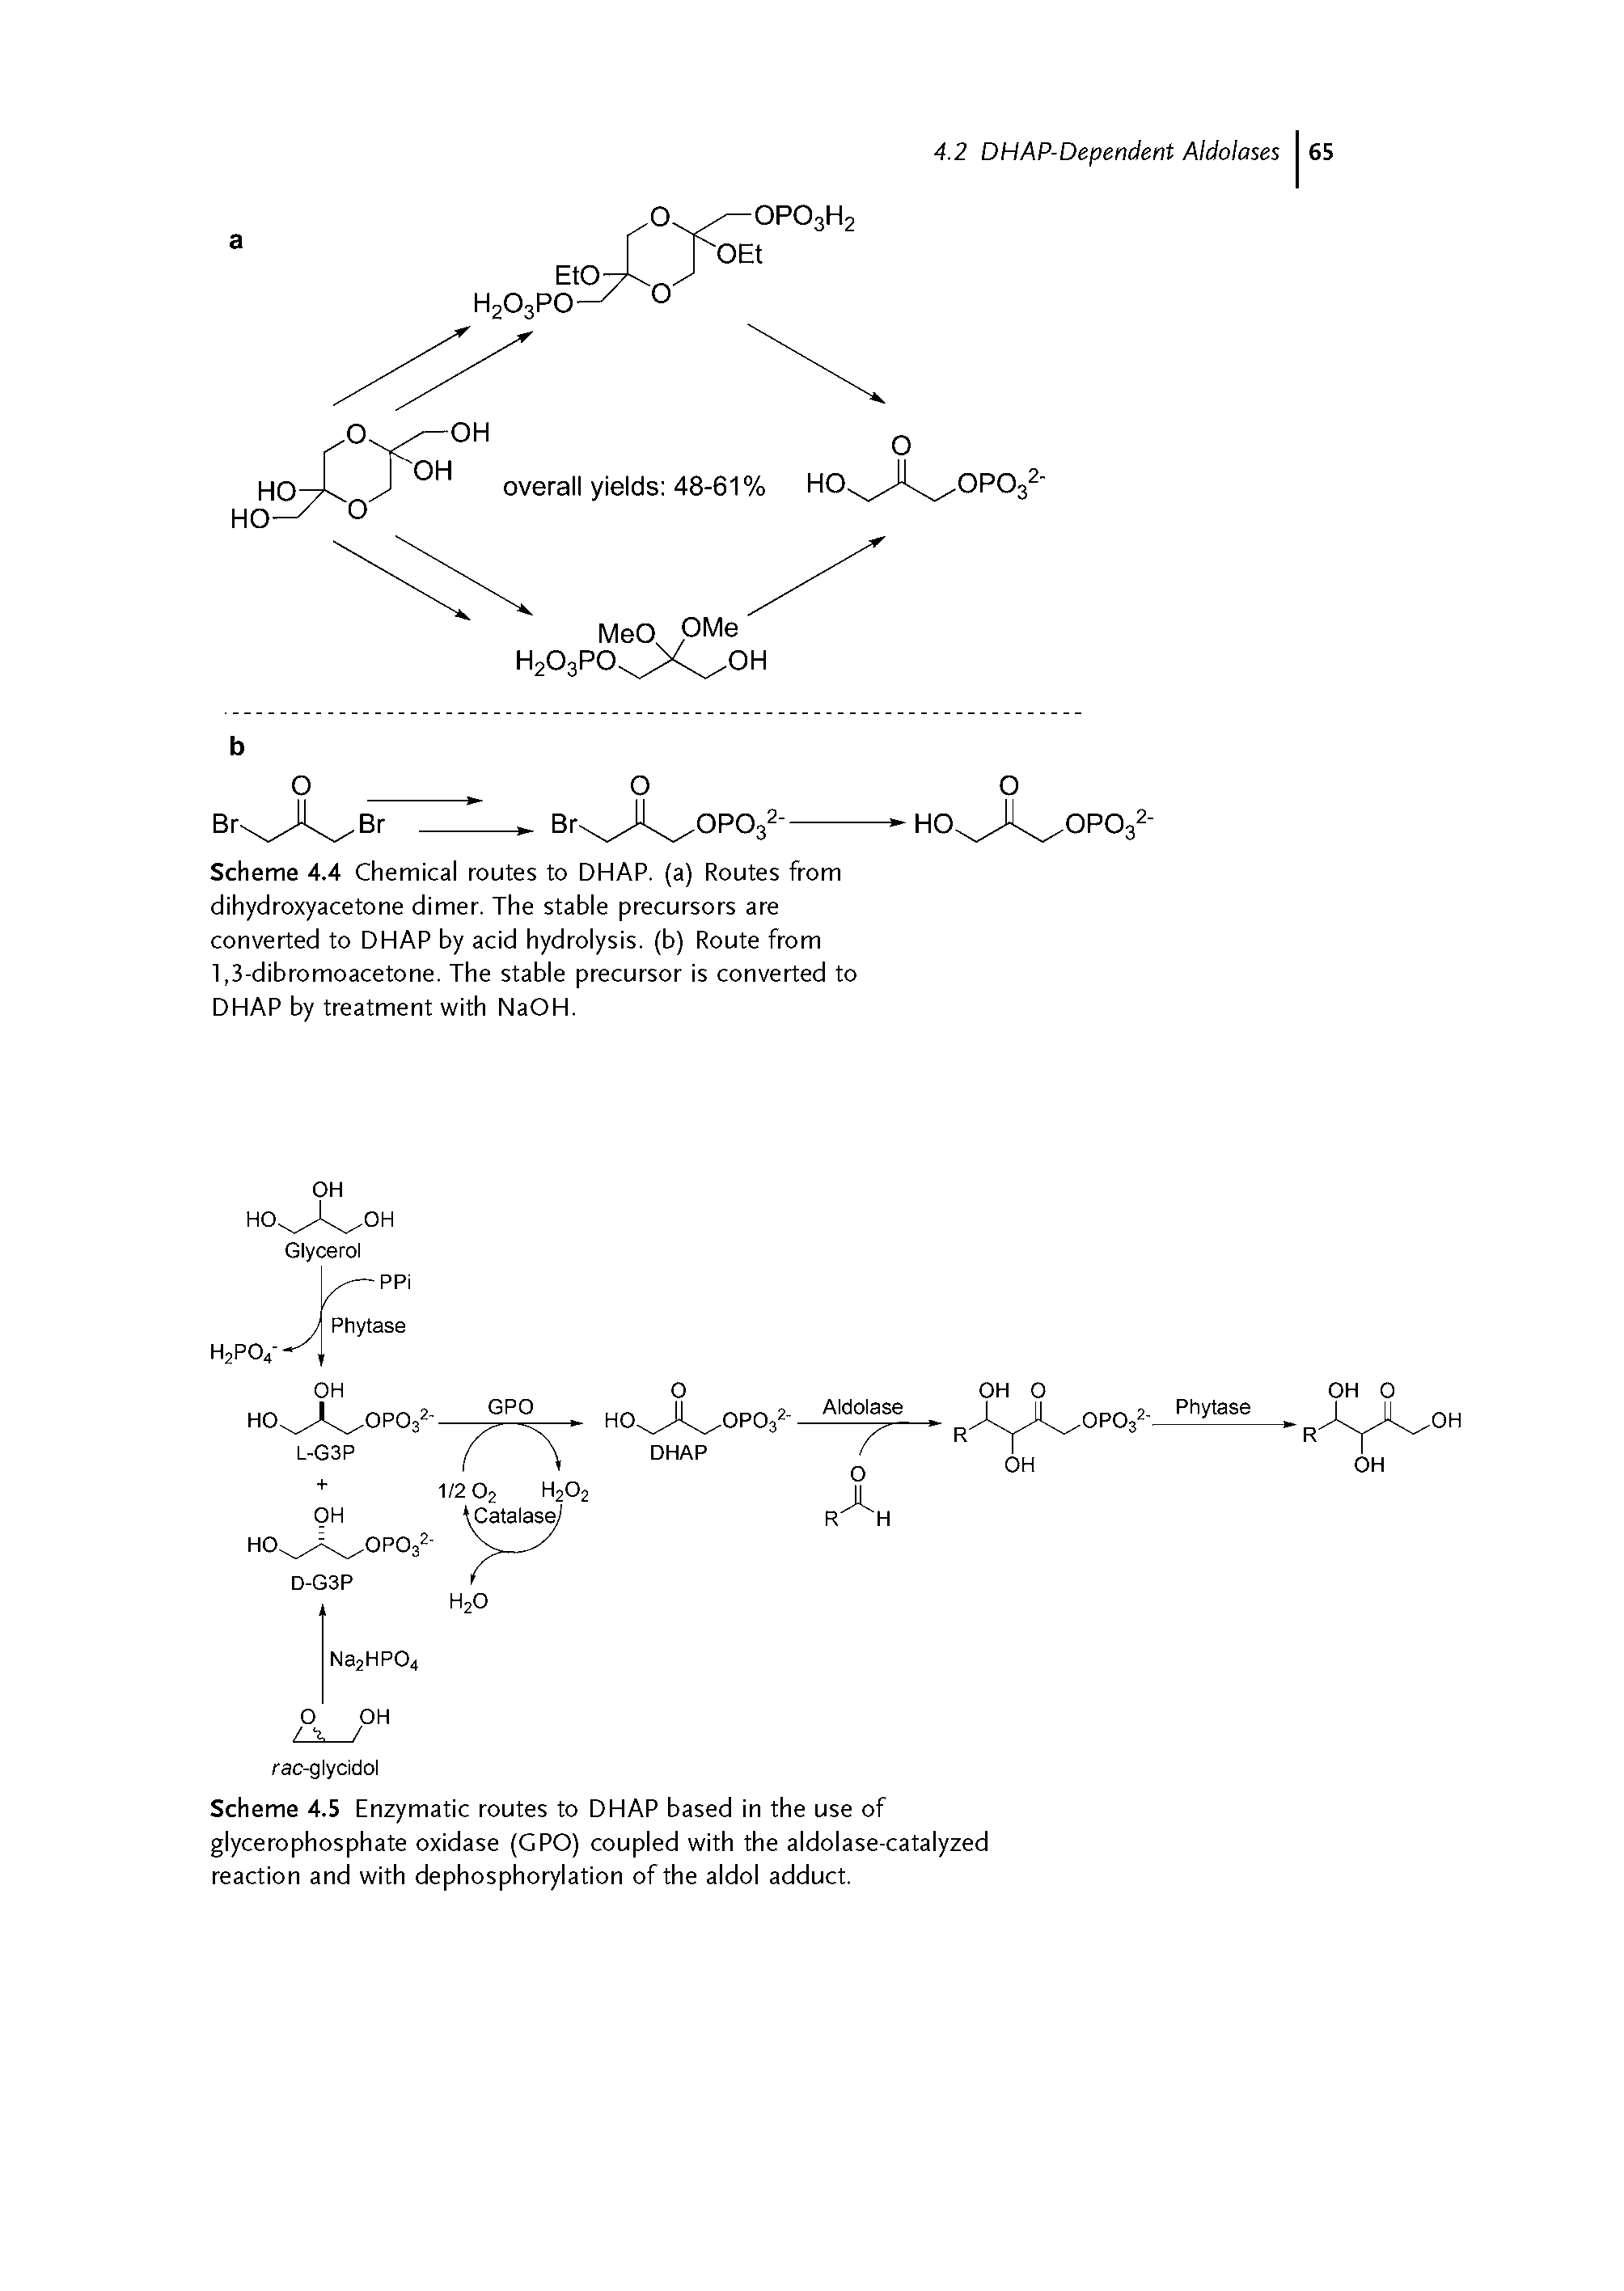 Scheme 4.5 Enzymatic routes to DHAP based in the use of glycerophosphate oxidase (GPO) coupled with the aldolase-catalyzed reaction and with dephosphorylation of the aldol adduct.